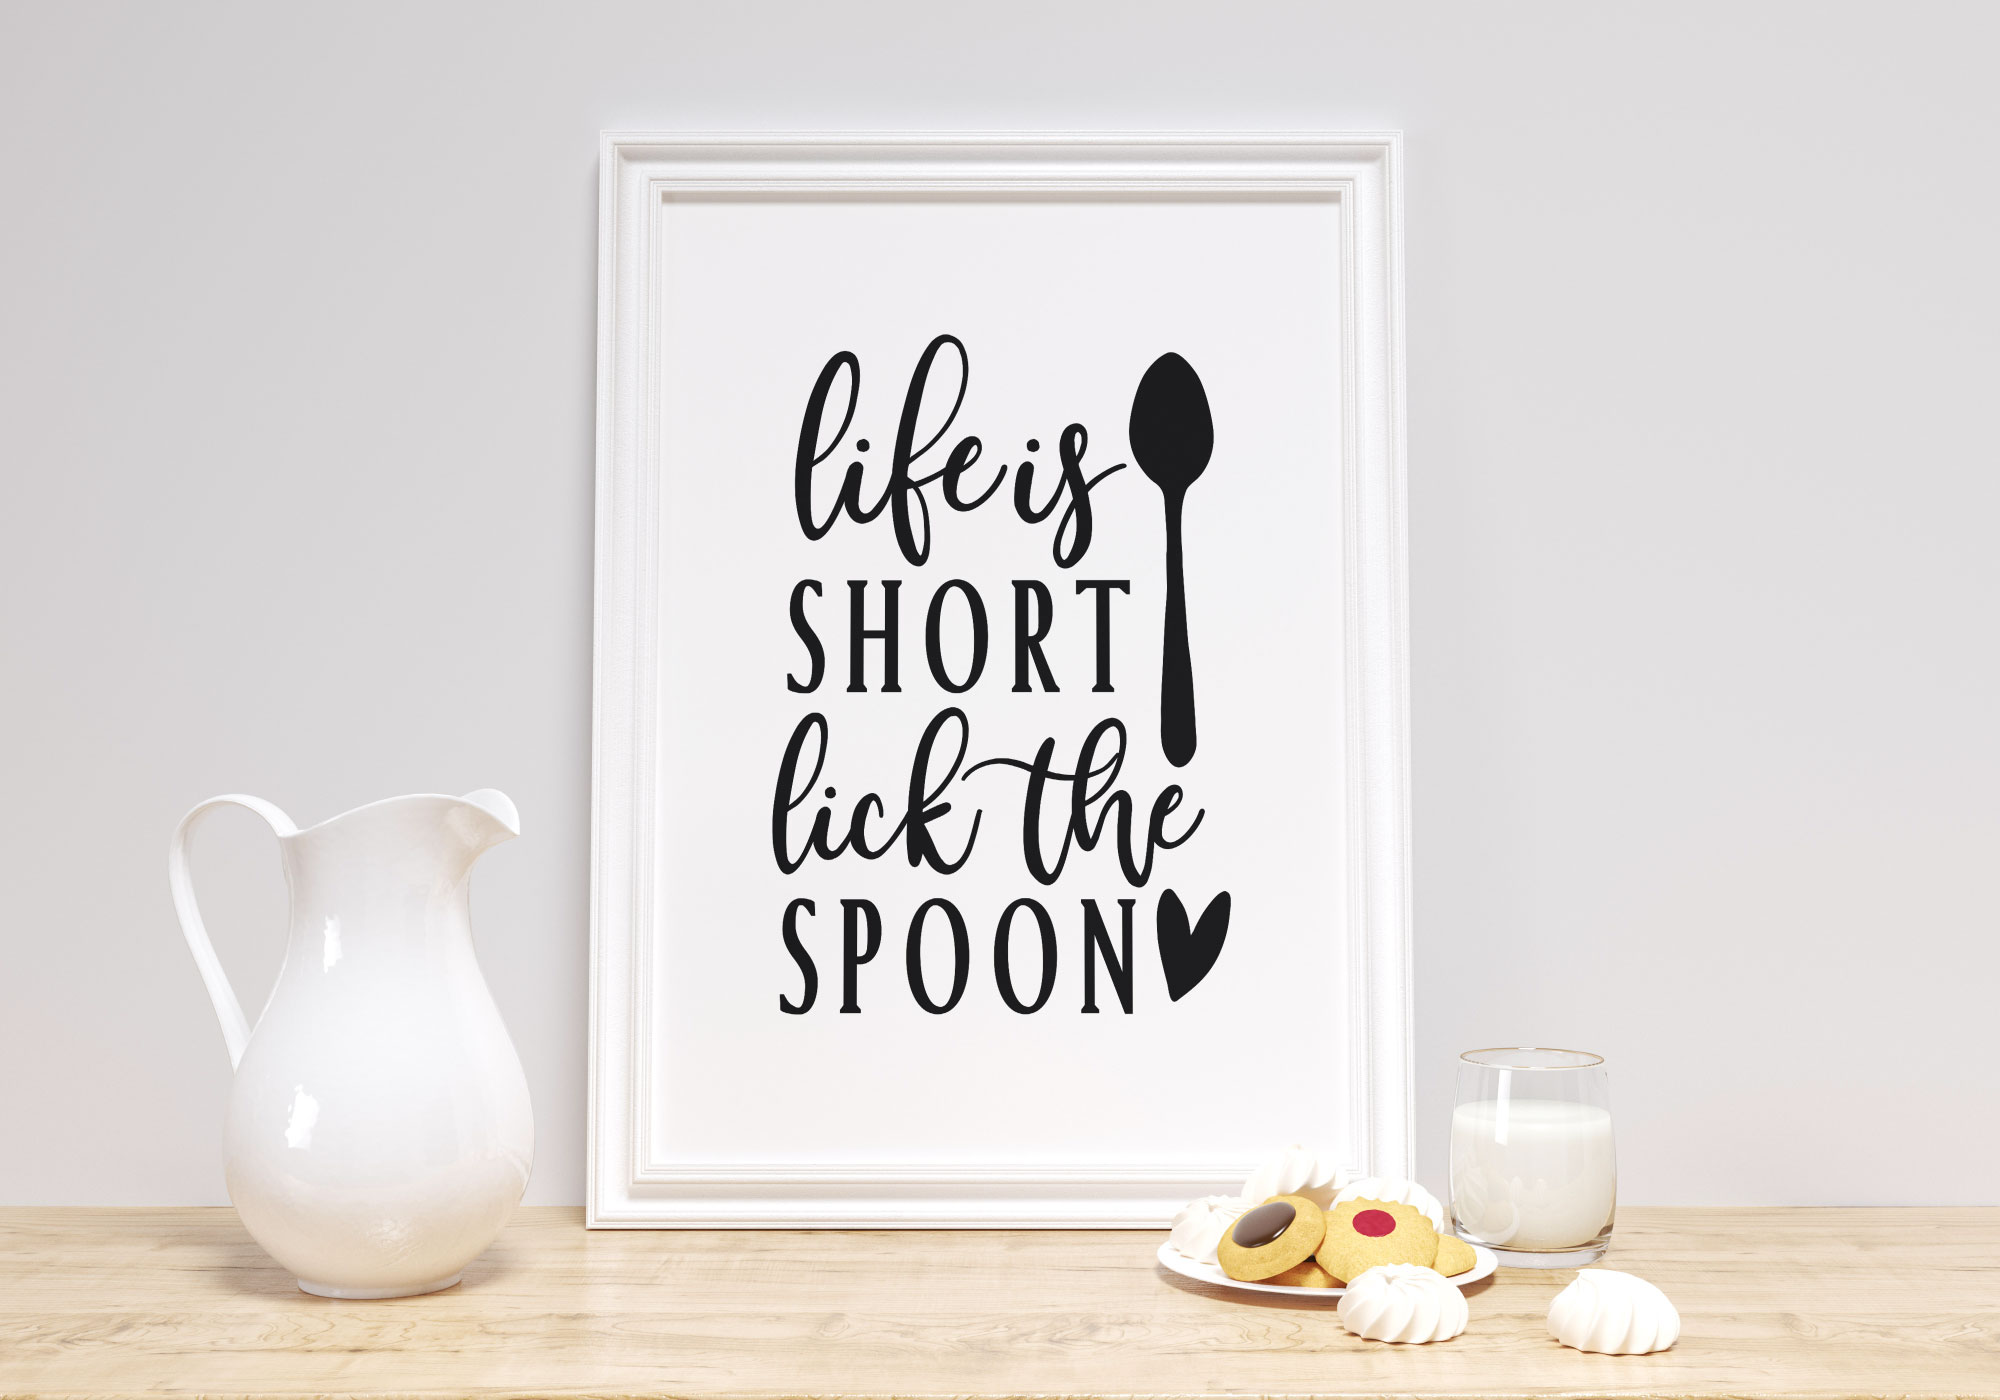 Free Life is Short, Lick the Spoon SVG Cut File